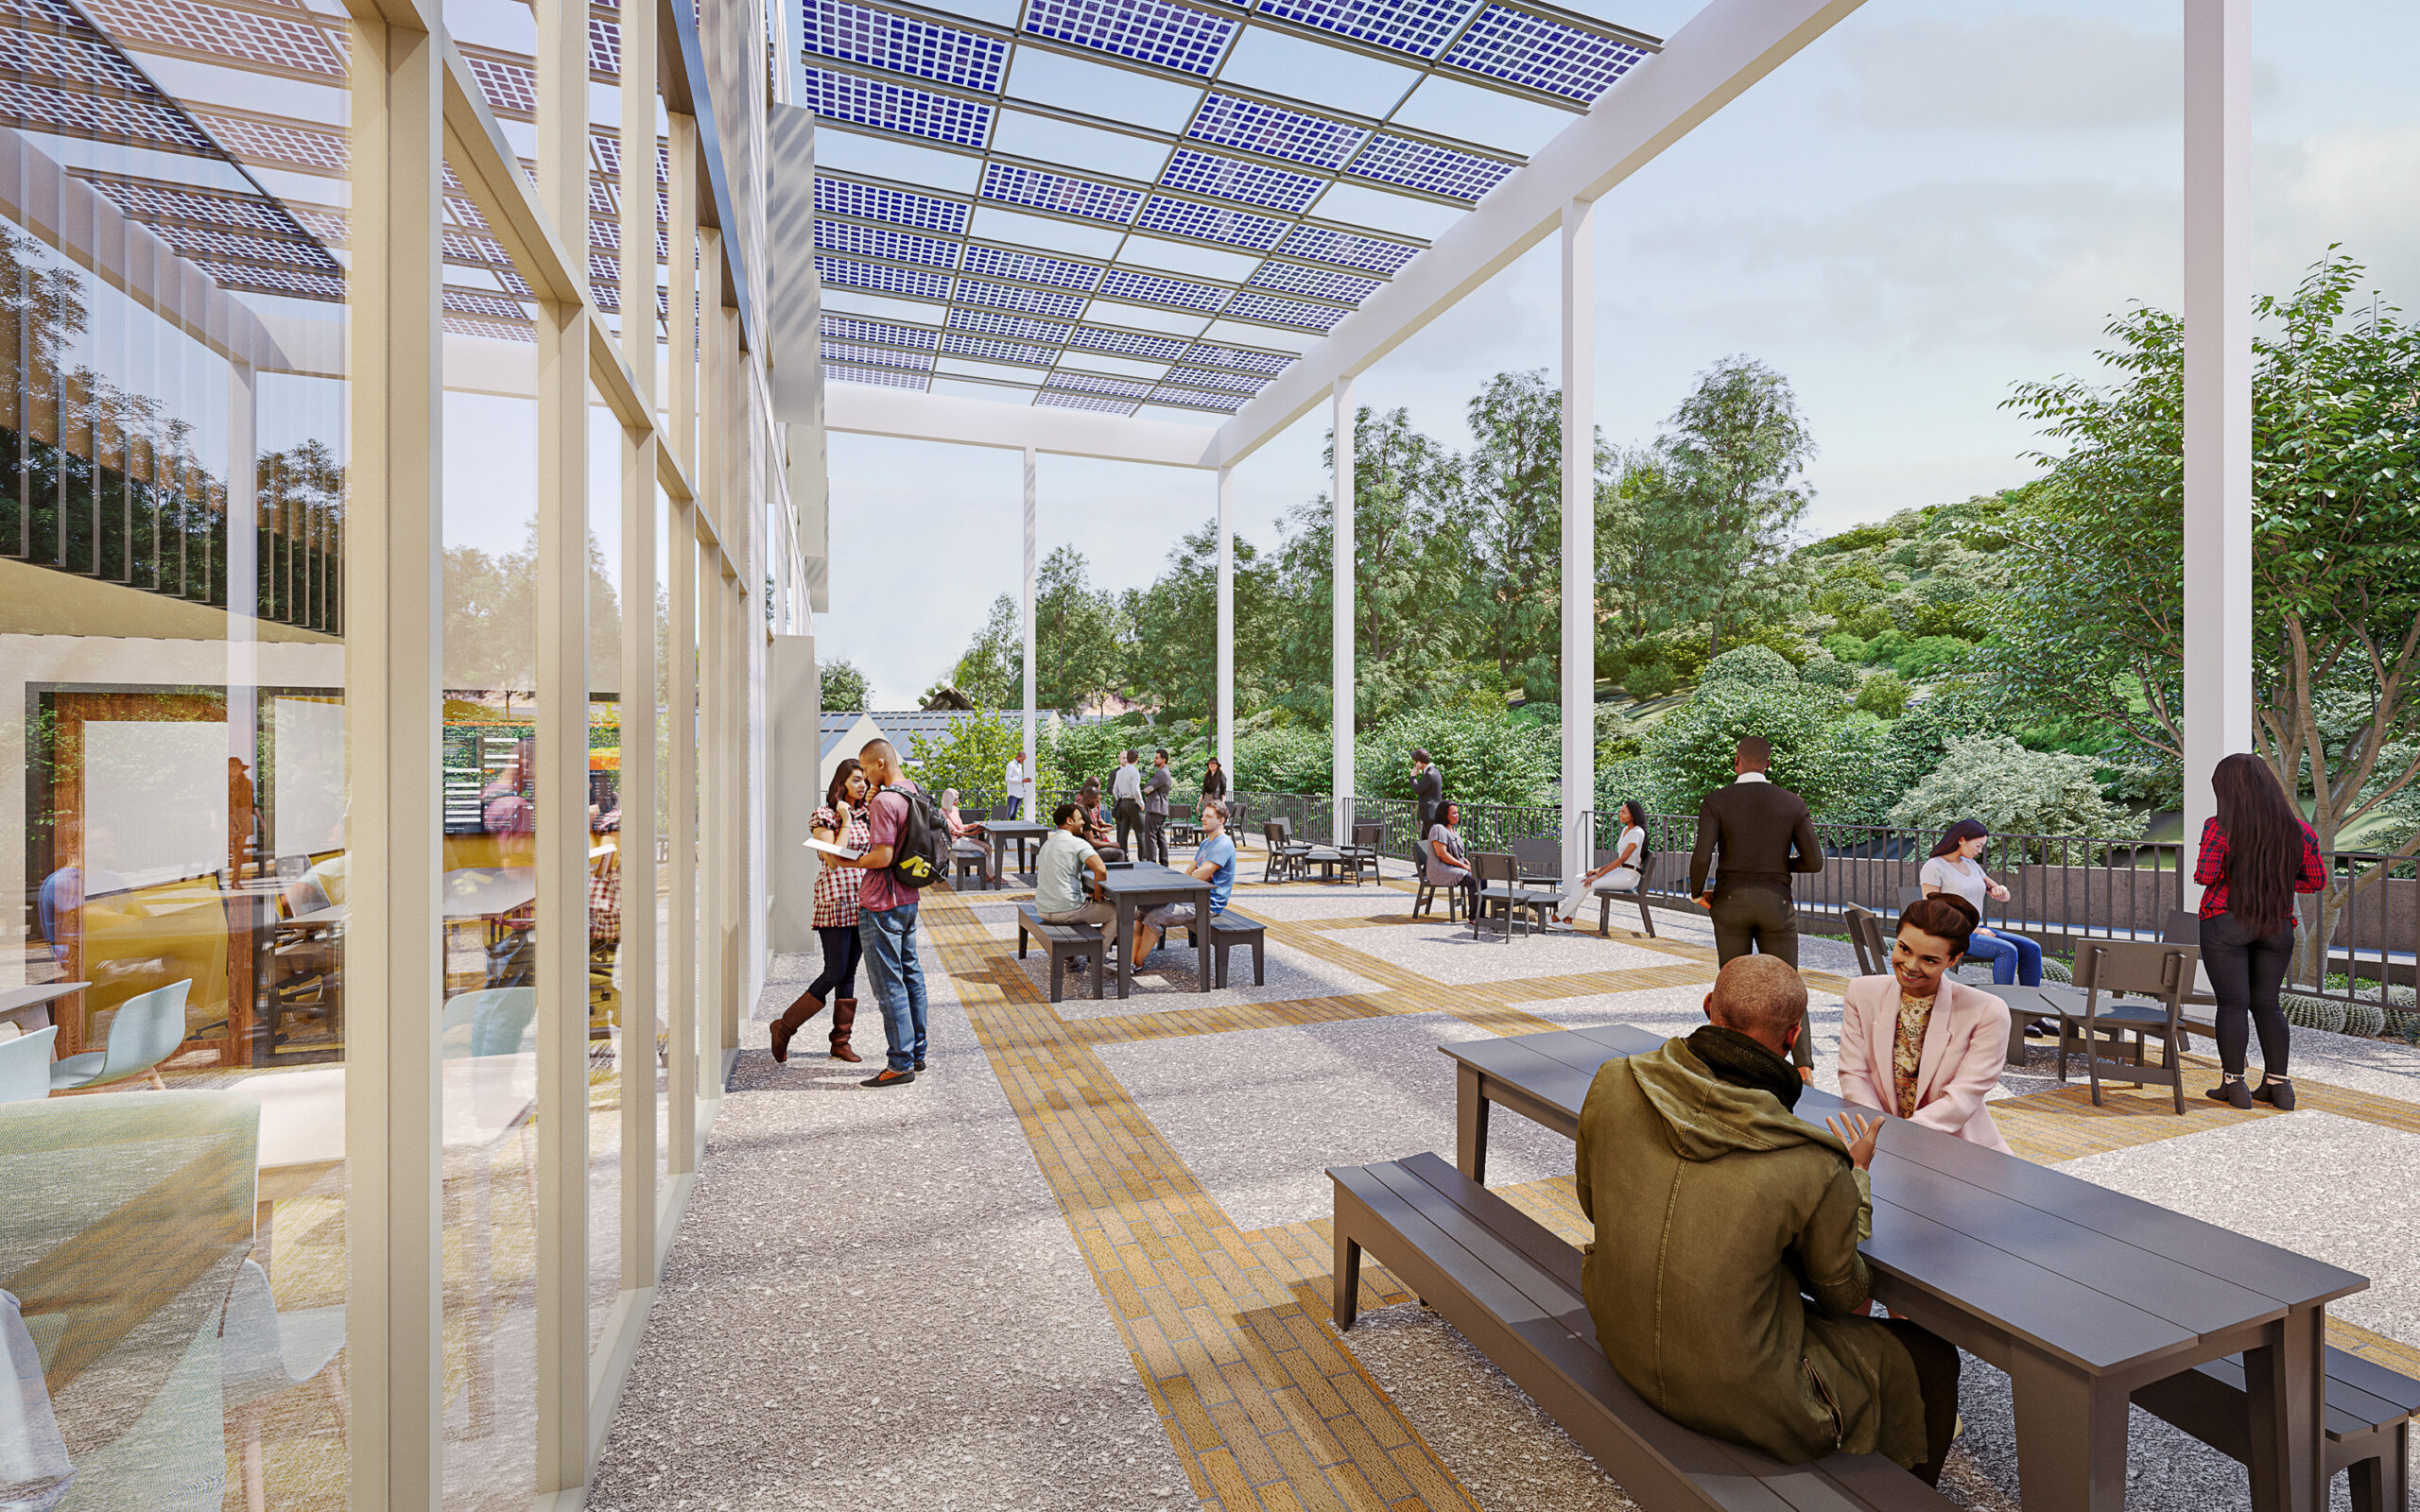 External CGI showing people sitting on benches and chatting at UC Riverside School of Business